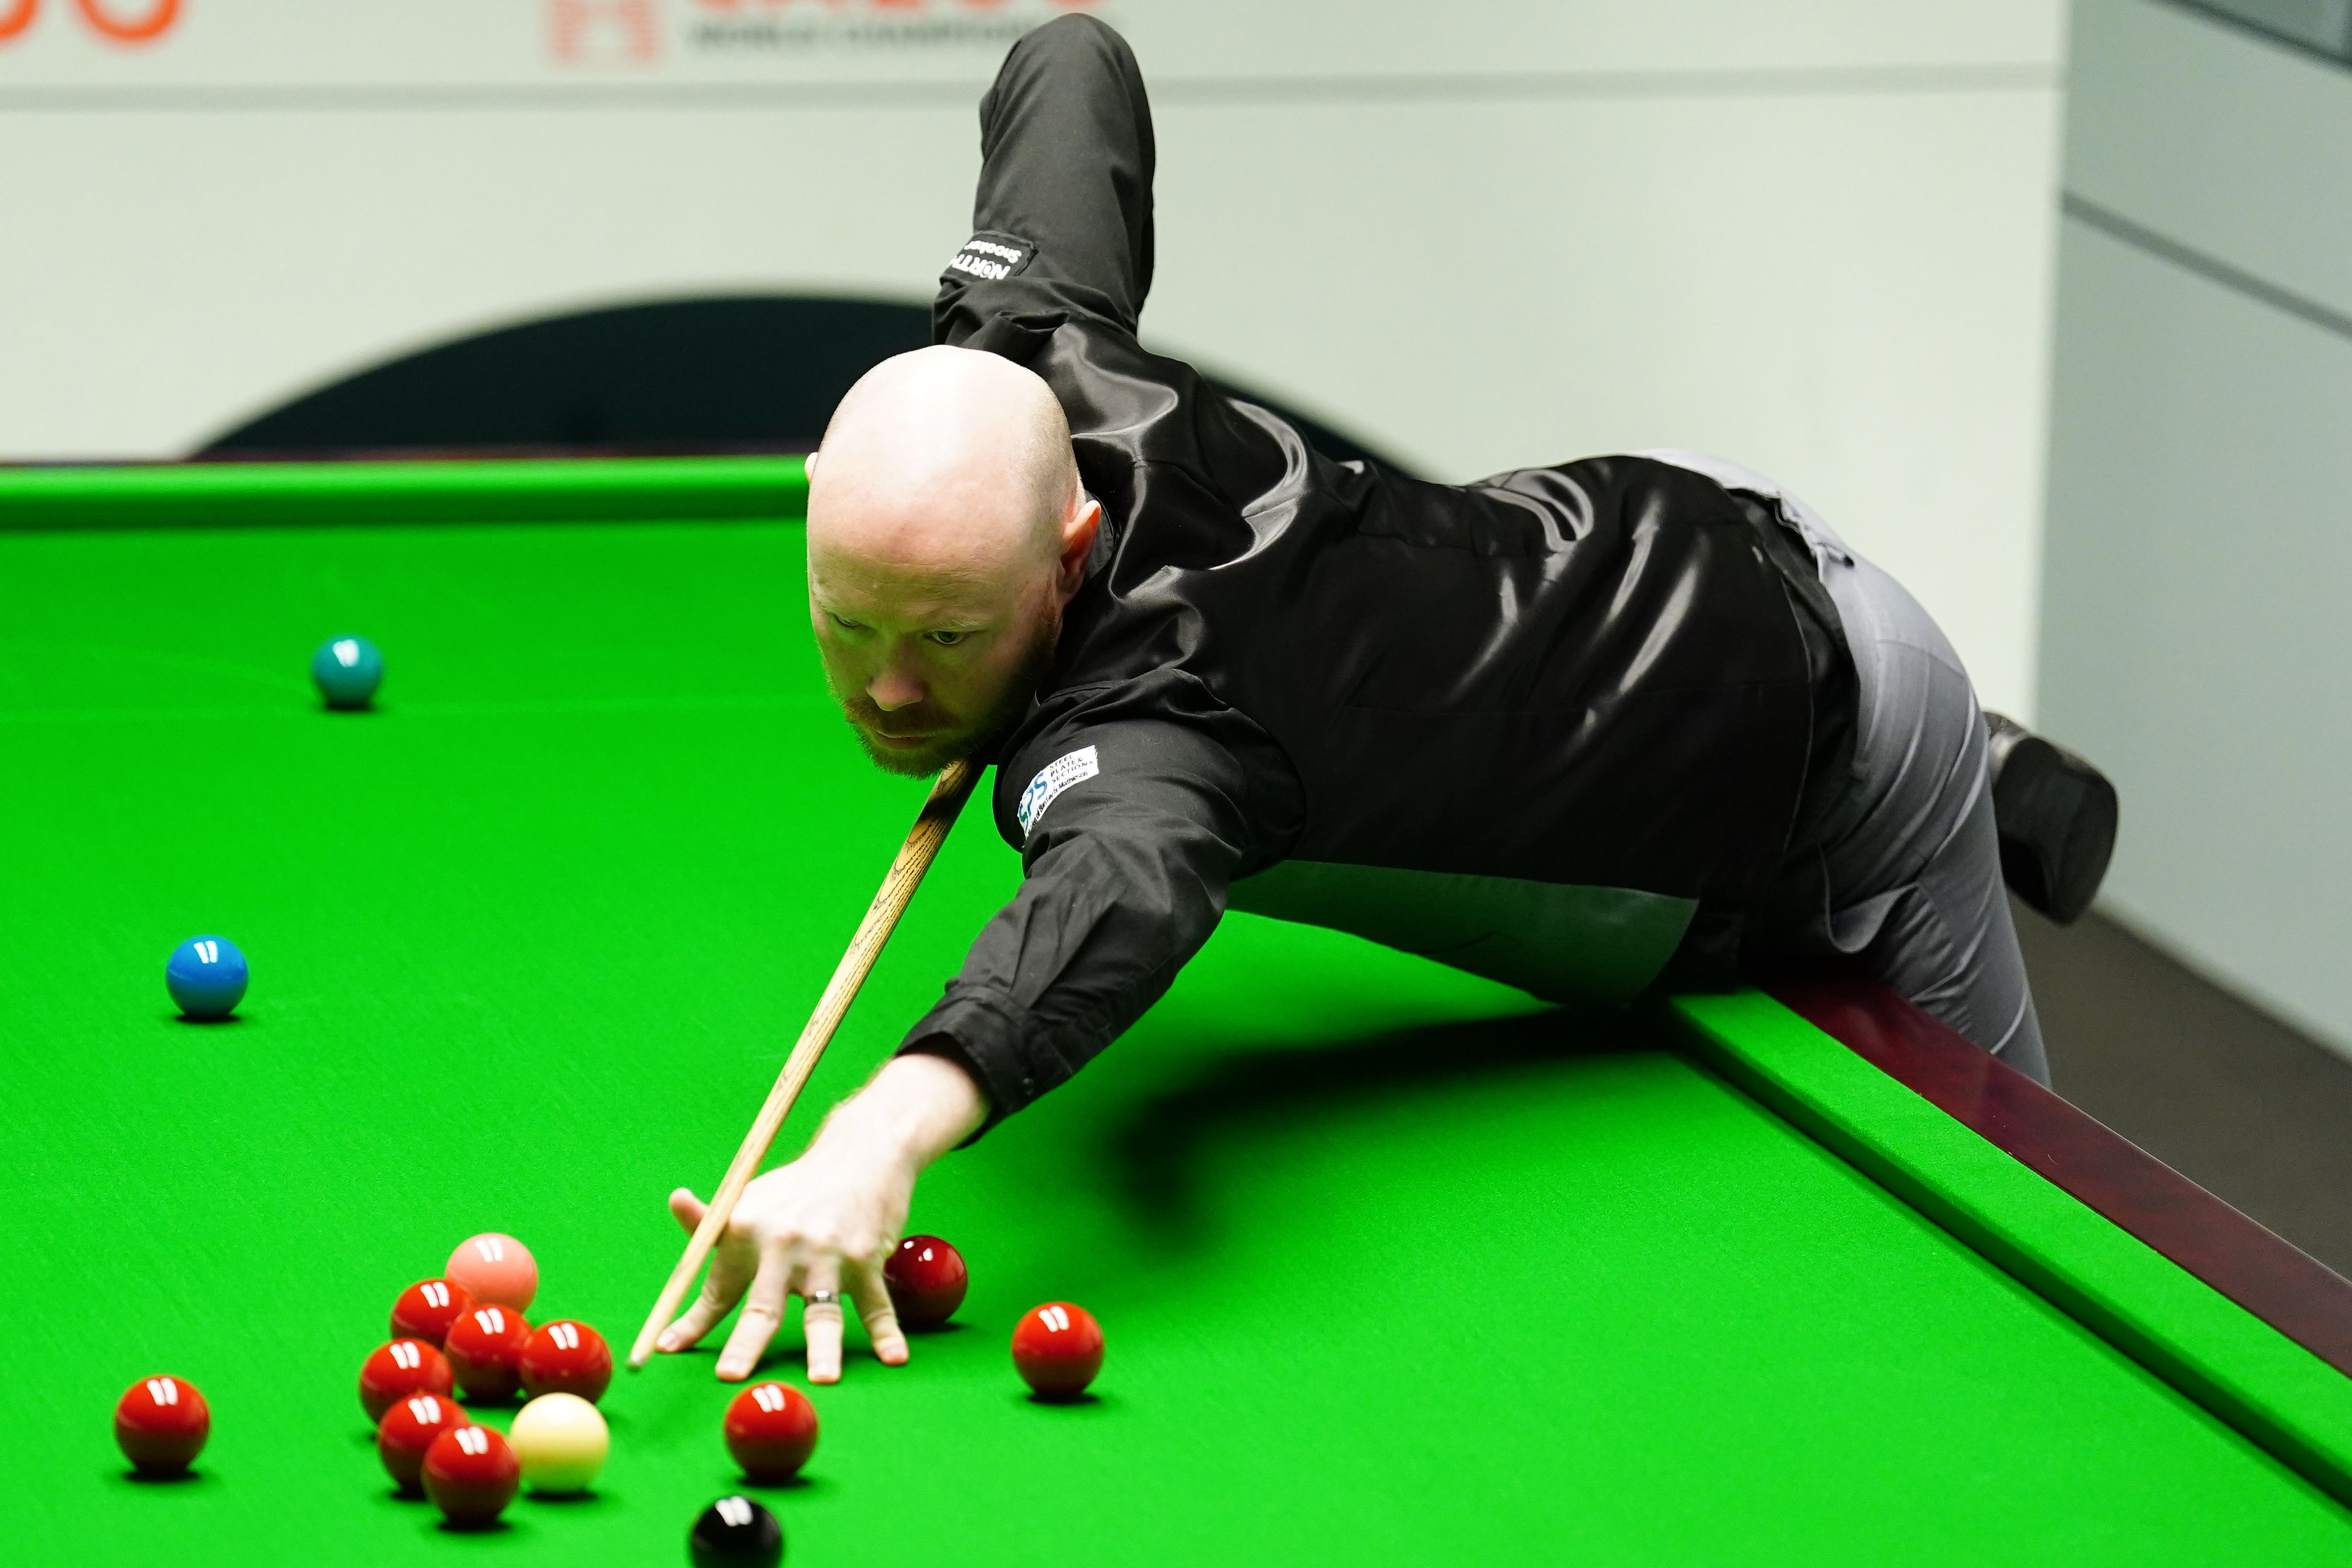 Gary Wilson builds up commanding lead over Elliot Slessor at Crucible The Independent